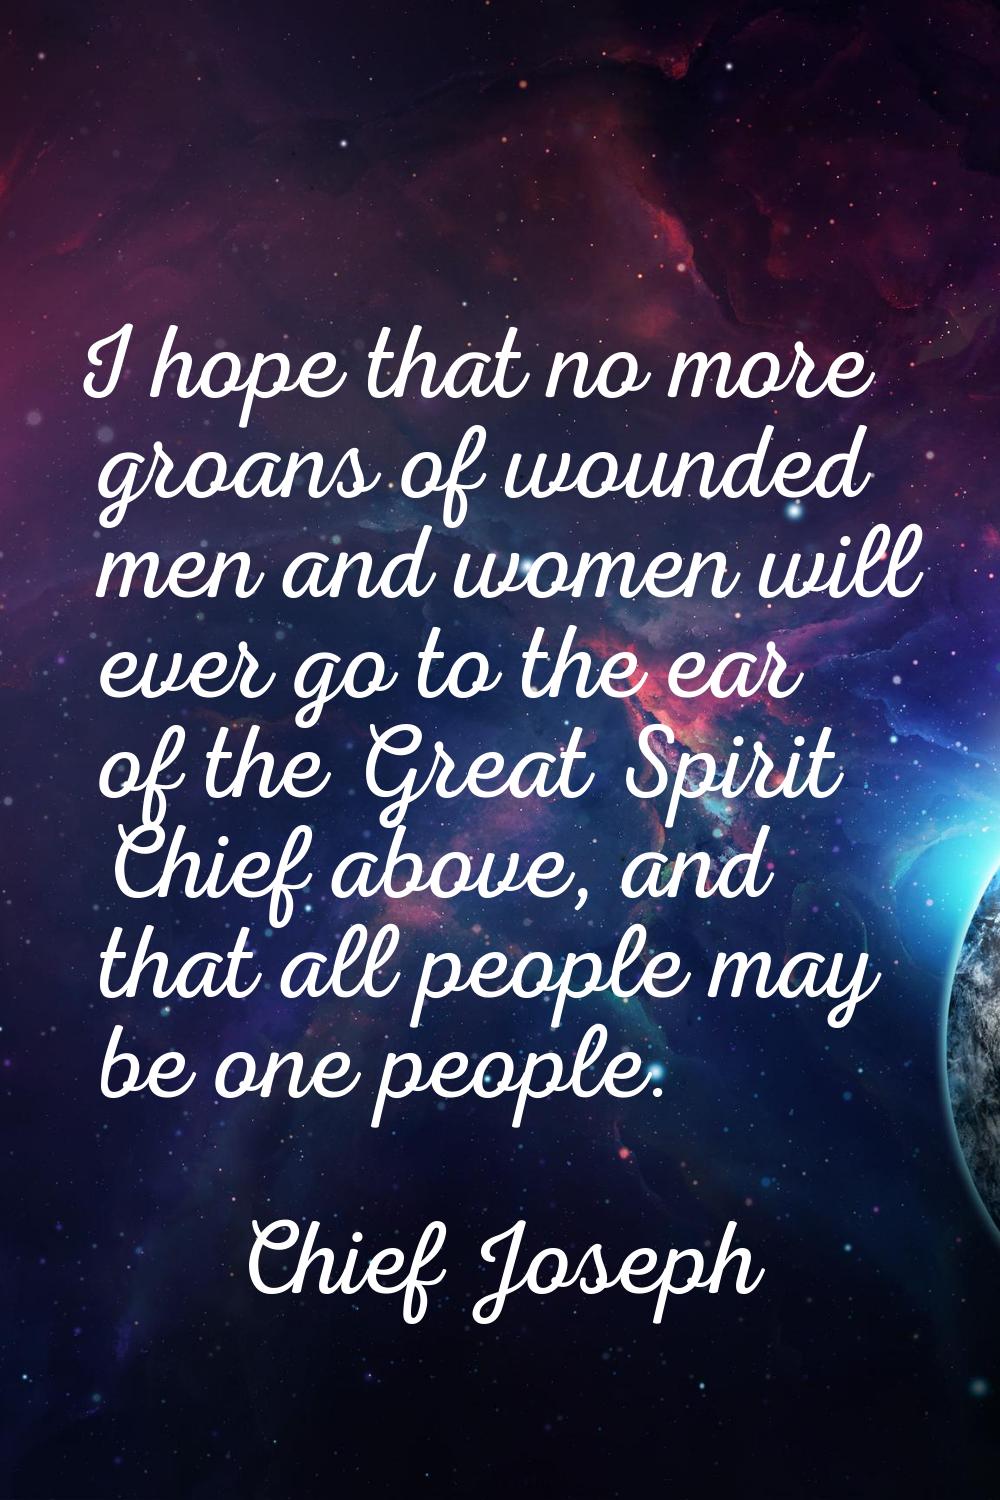 I hope that no more groans of wounded men and women will ever go to the ear of the Great Spirit Chi